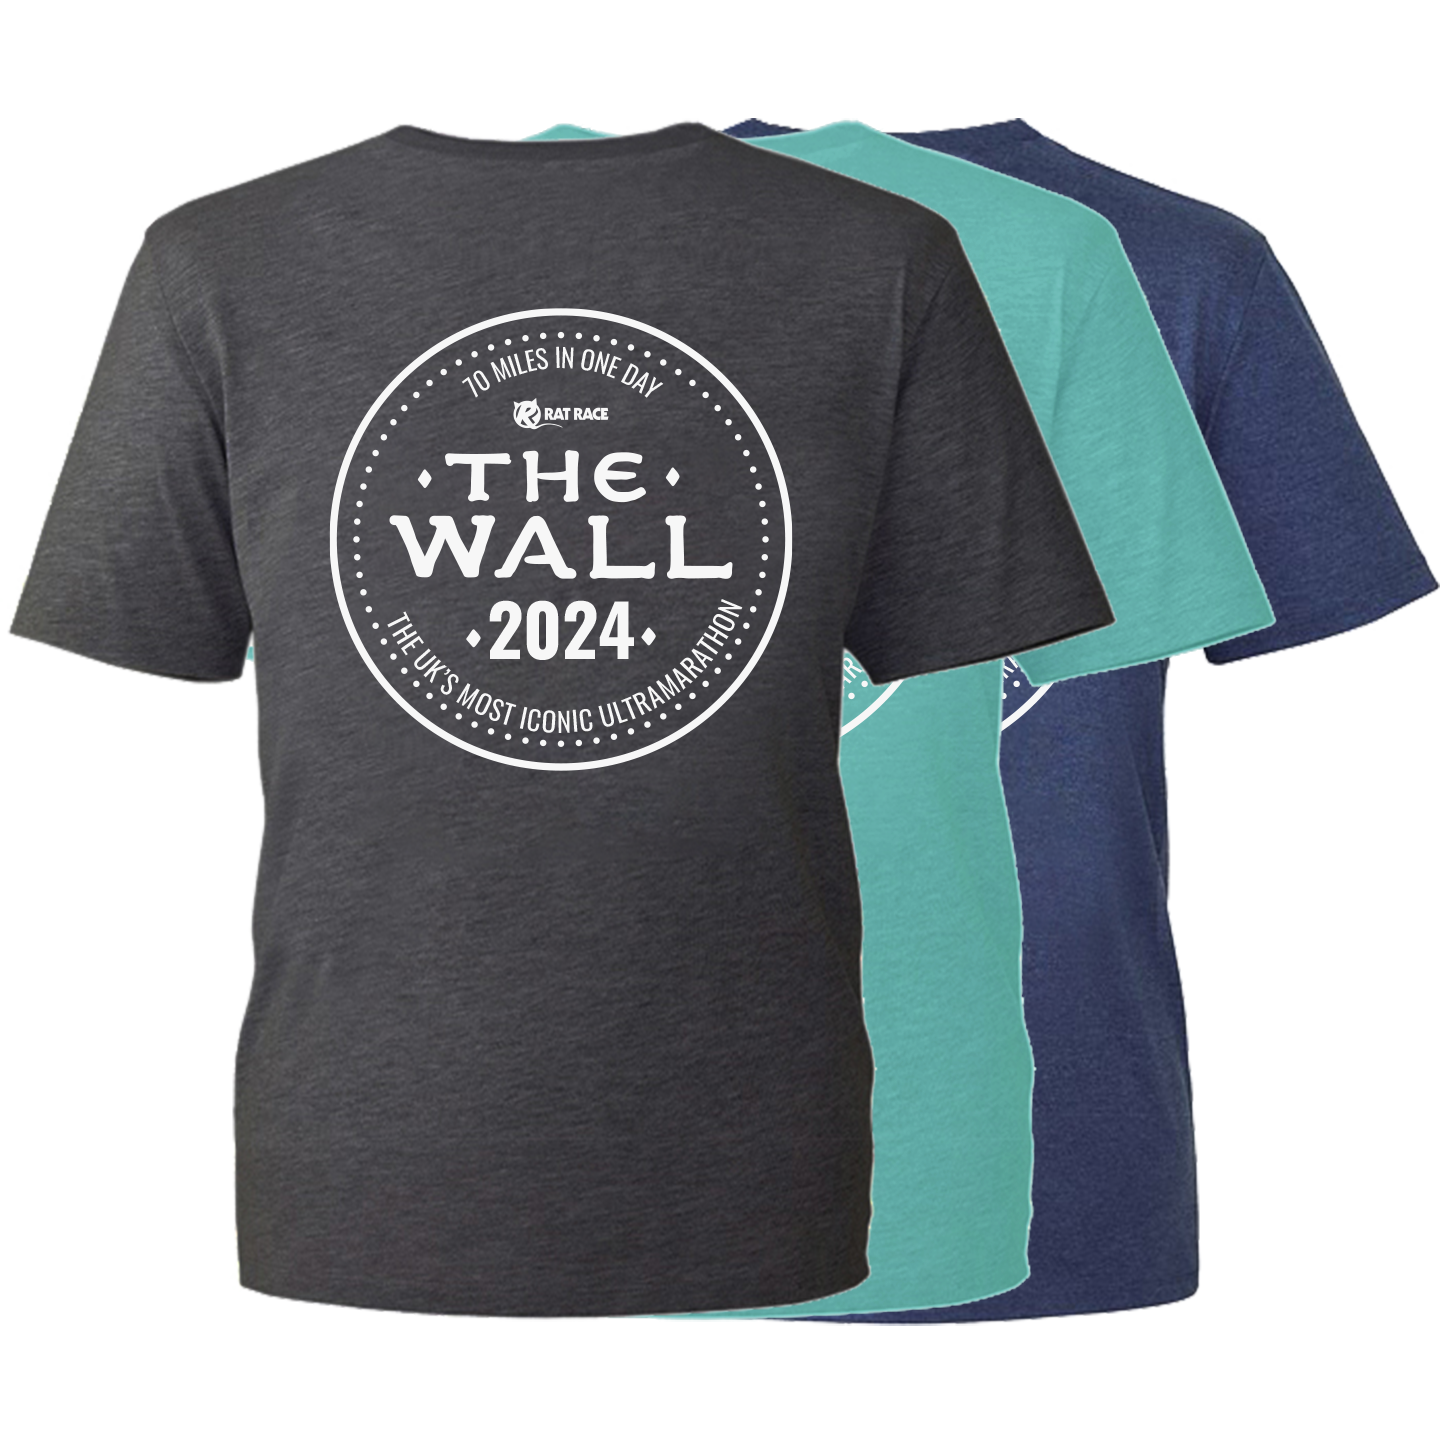 The Wall 2024 T-shirt